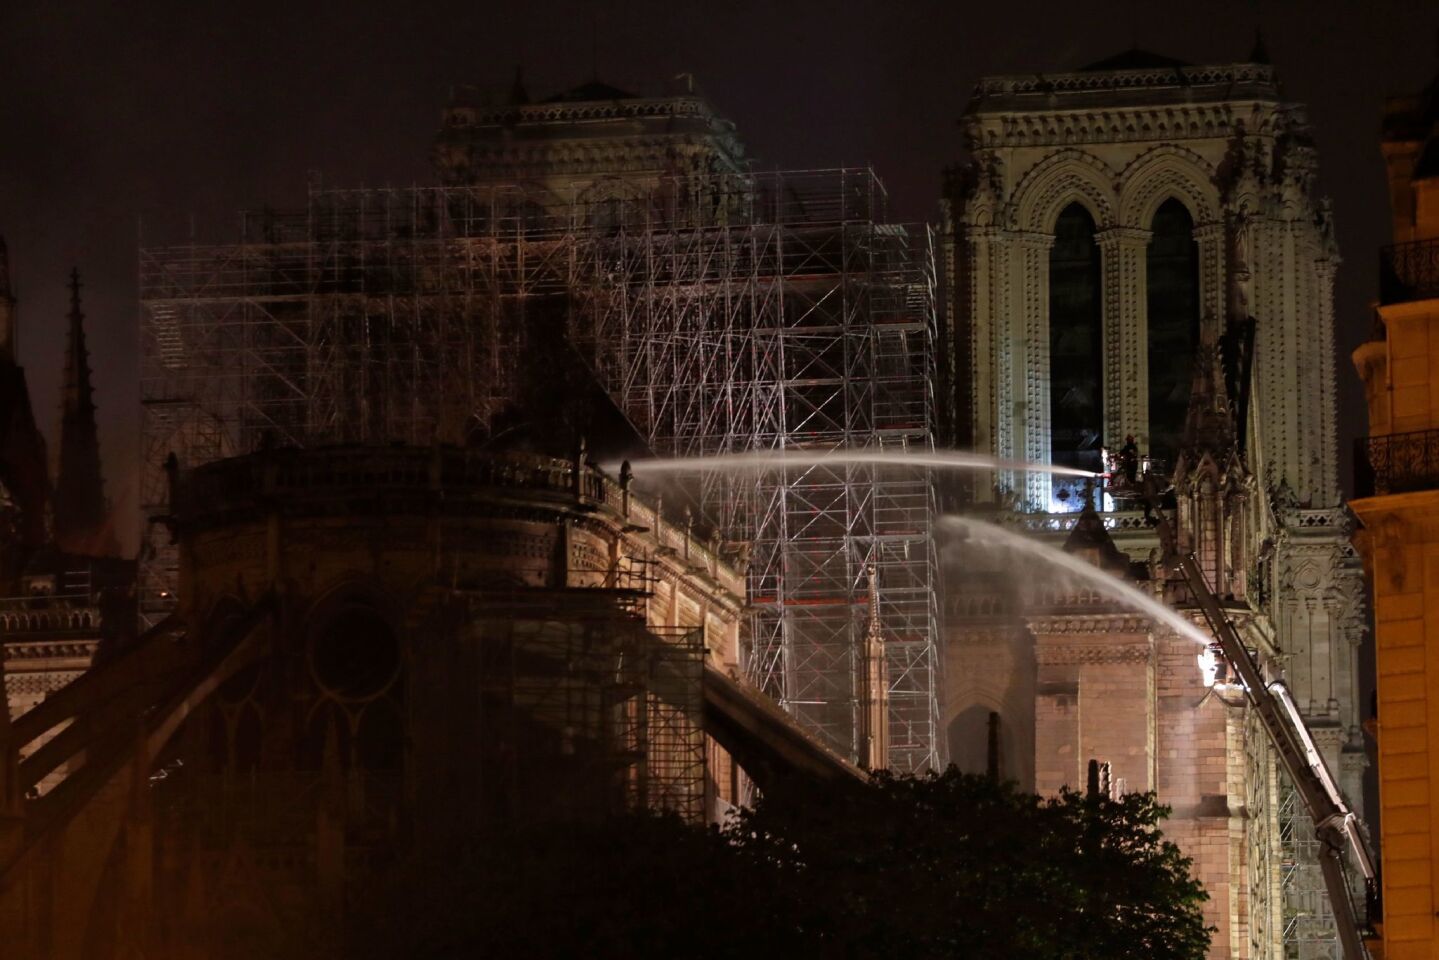 Firefighters douse the facade of Notre Dame. A ferocious and fast-moving blaze, which broke out about 6:45 p.m., destroyed large parts of the 850-year-old Gothic monument in Paris.